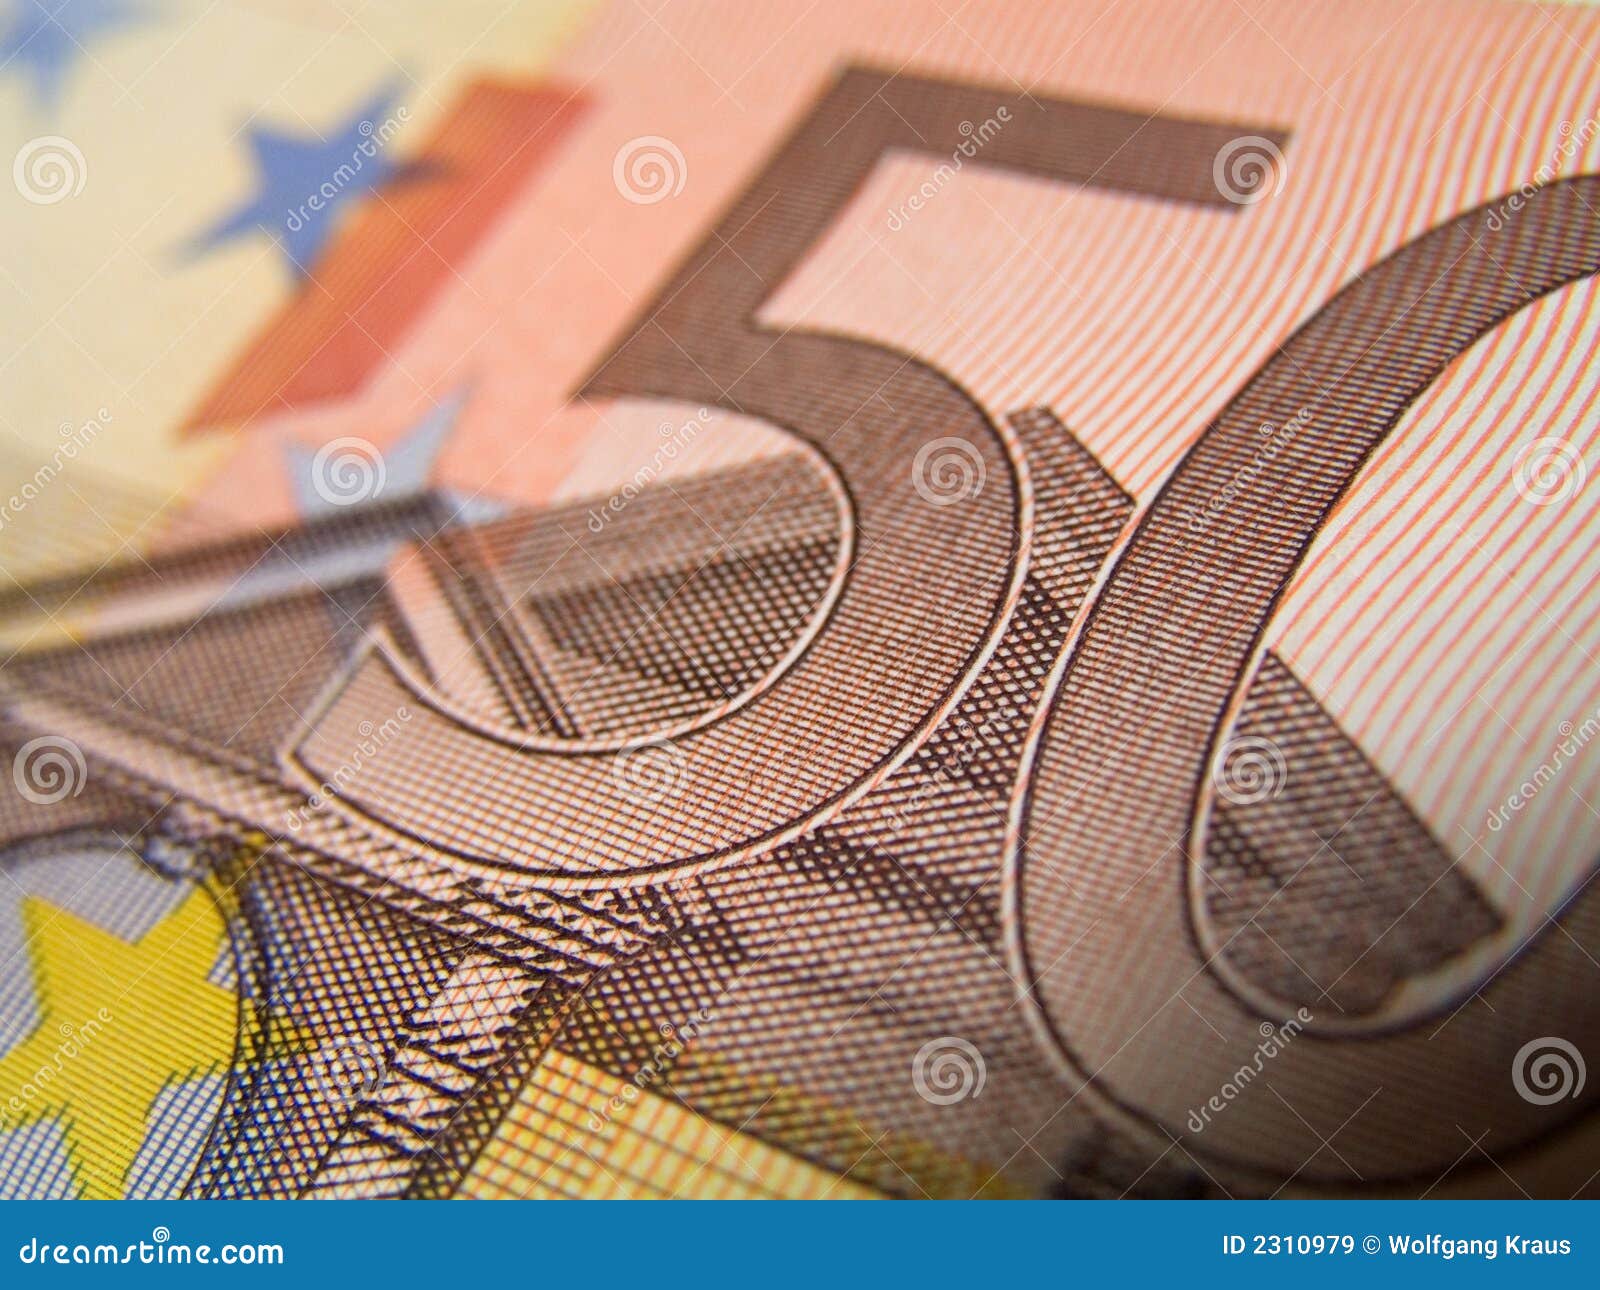 fifty eur banknotes, detail